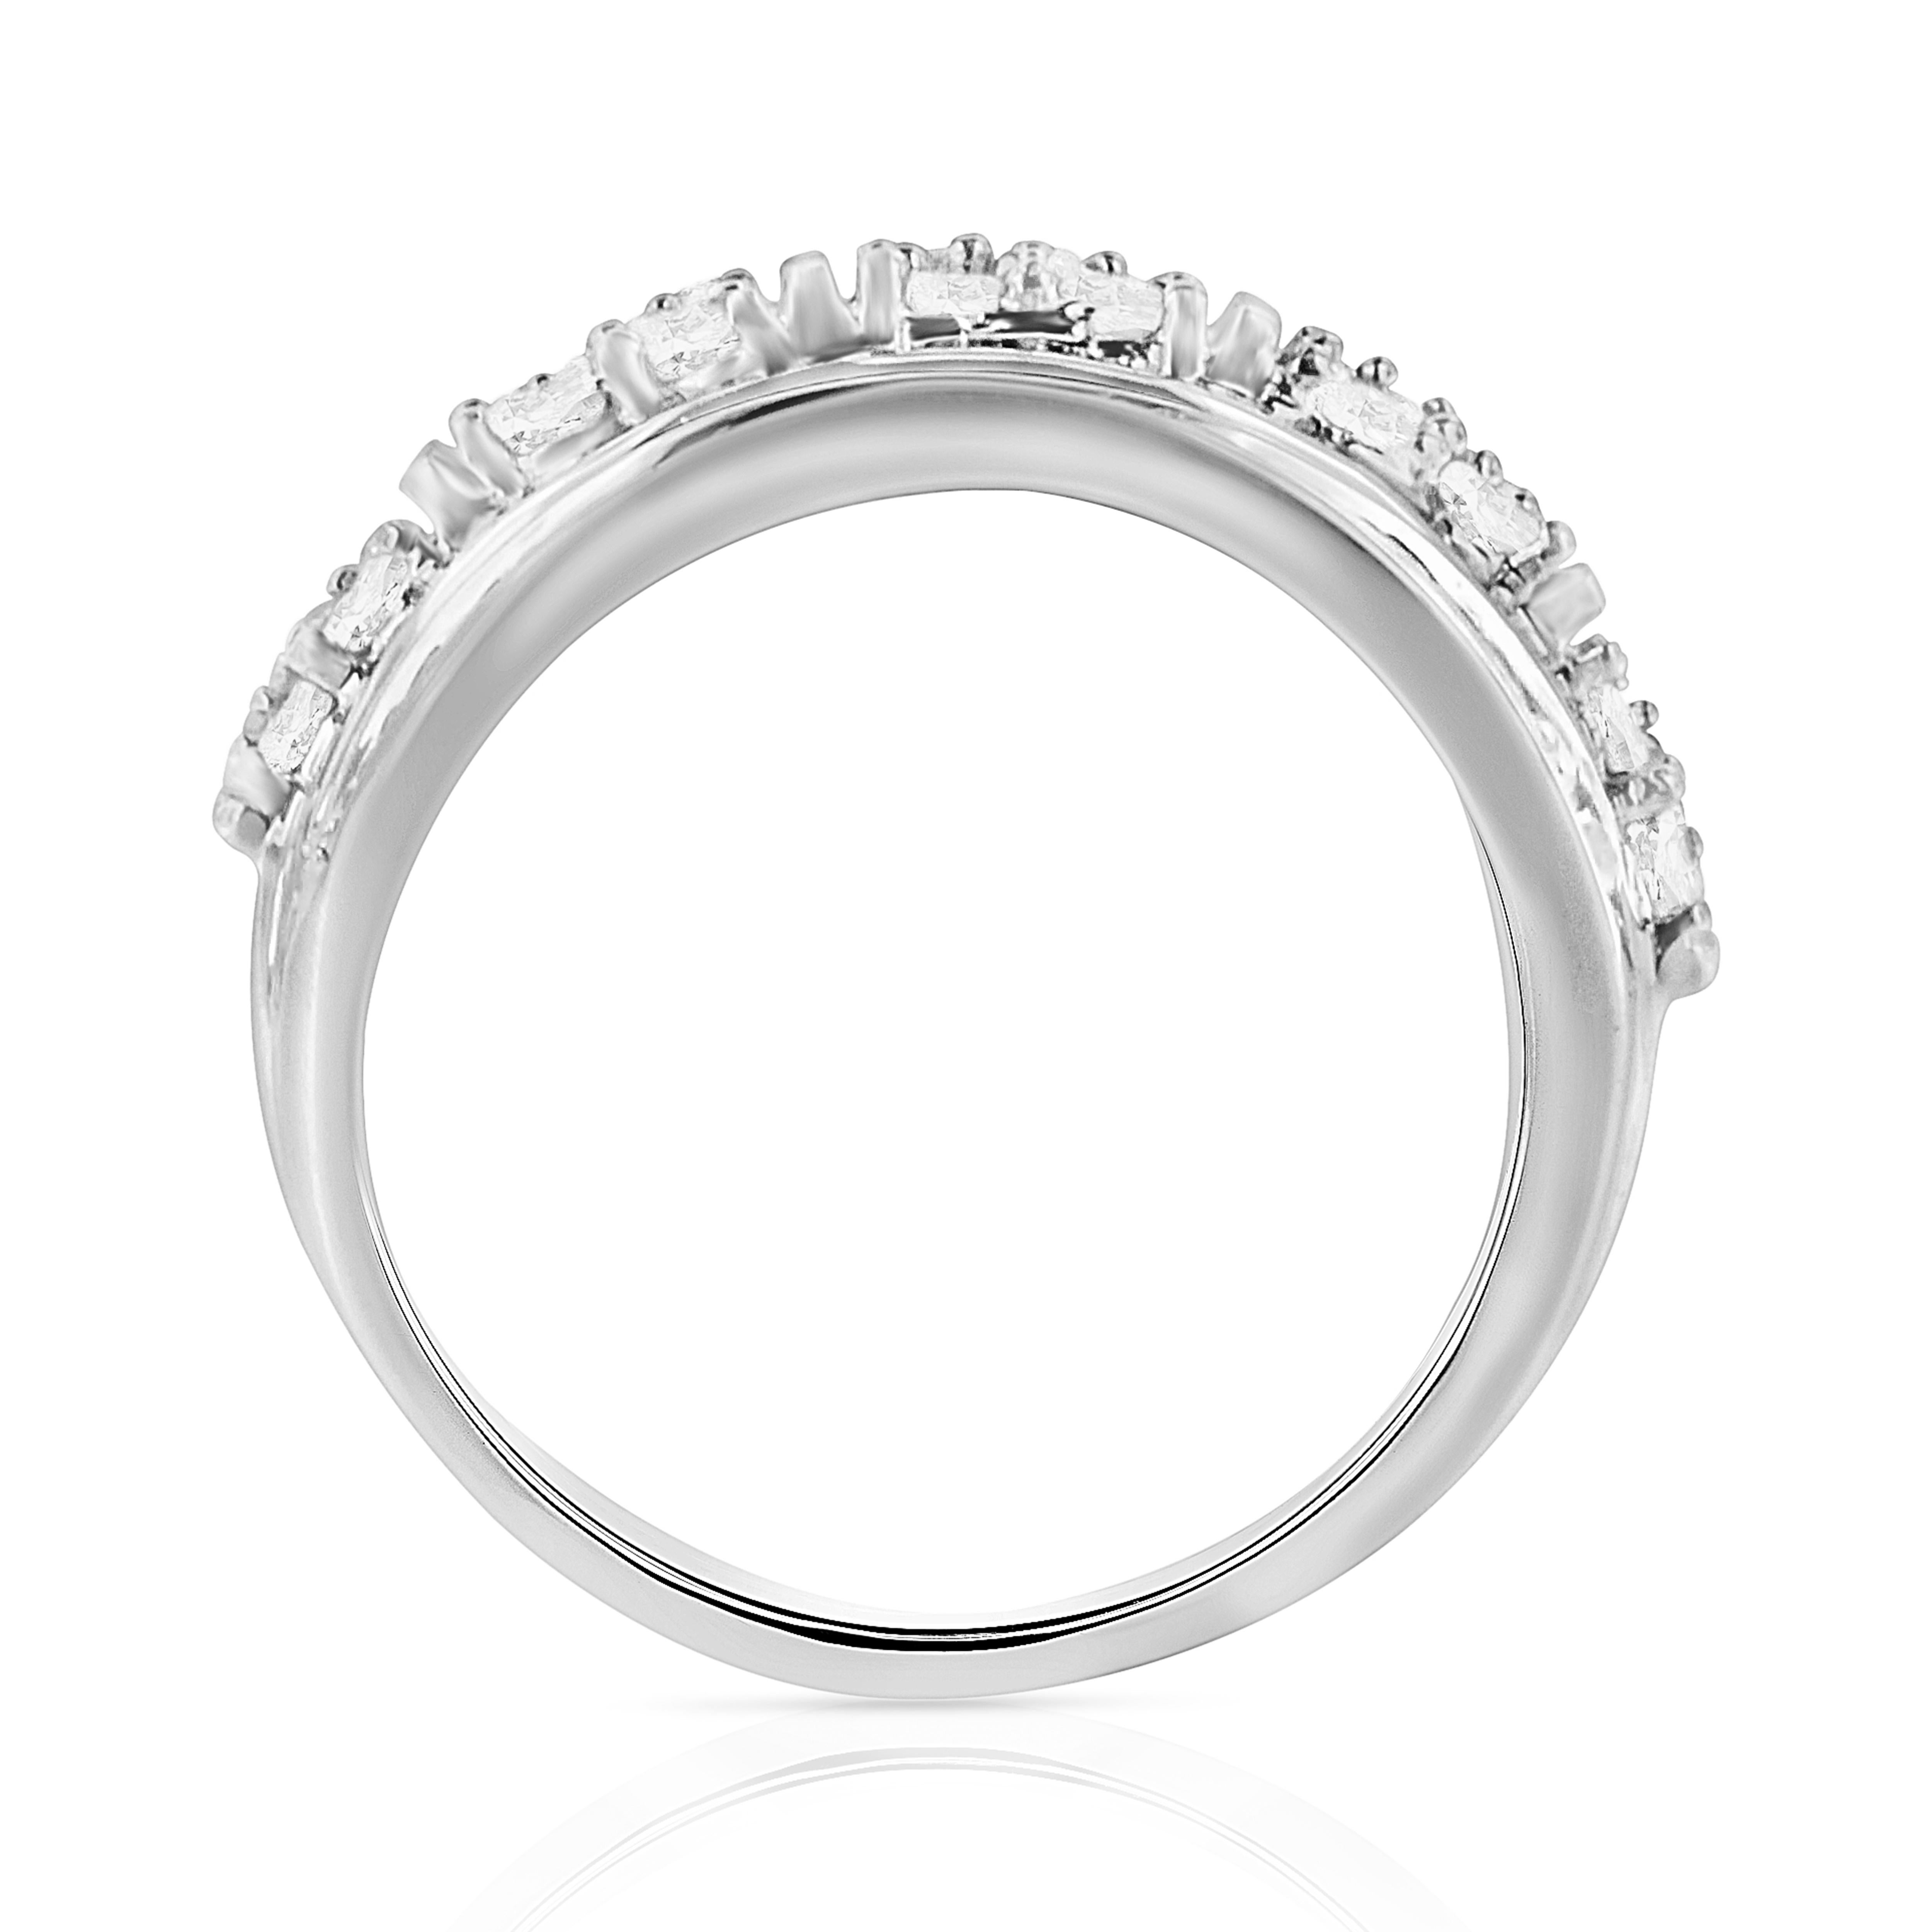 For Sale:  .925 Sterling Silver 2.0 Carat Diamond Multi-Row Tapered Cocktail Fashion Ring 4